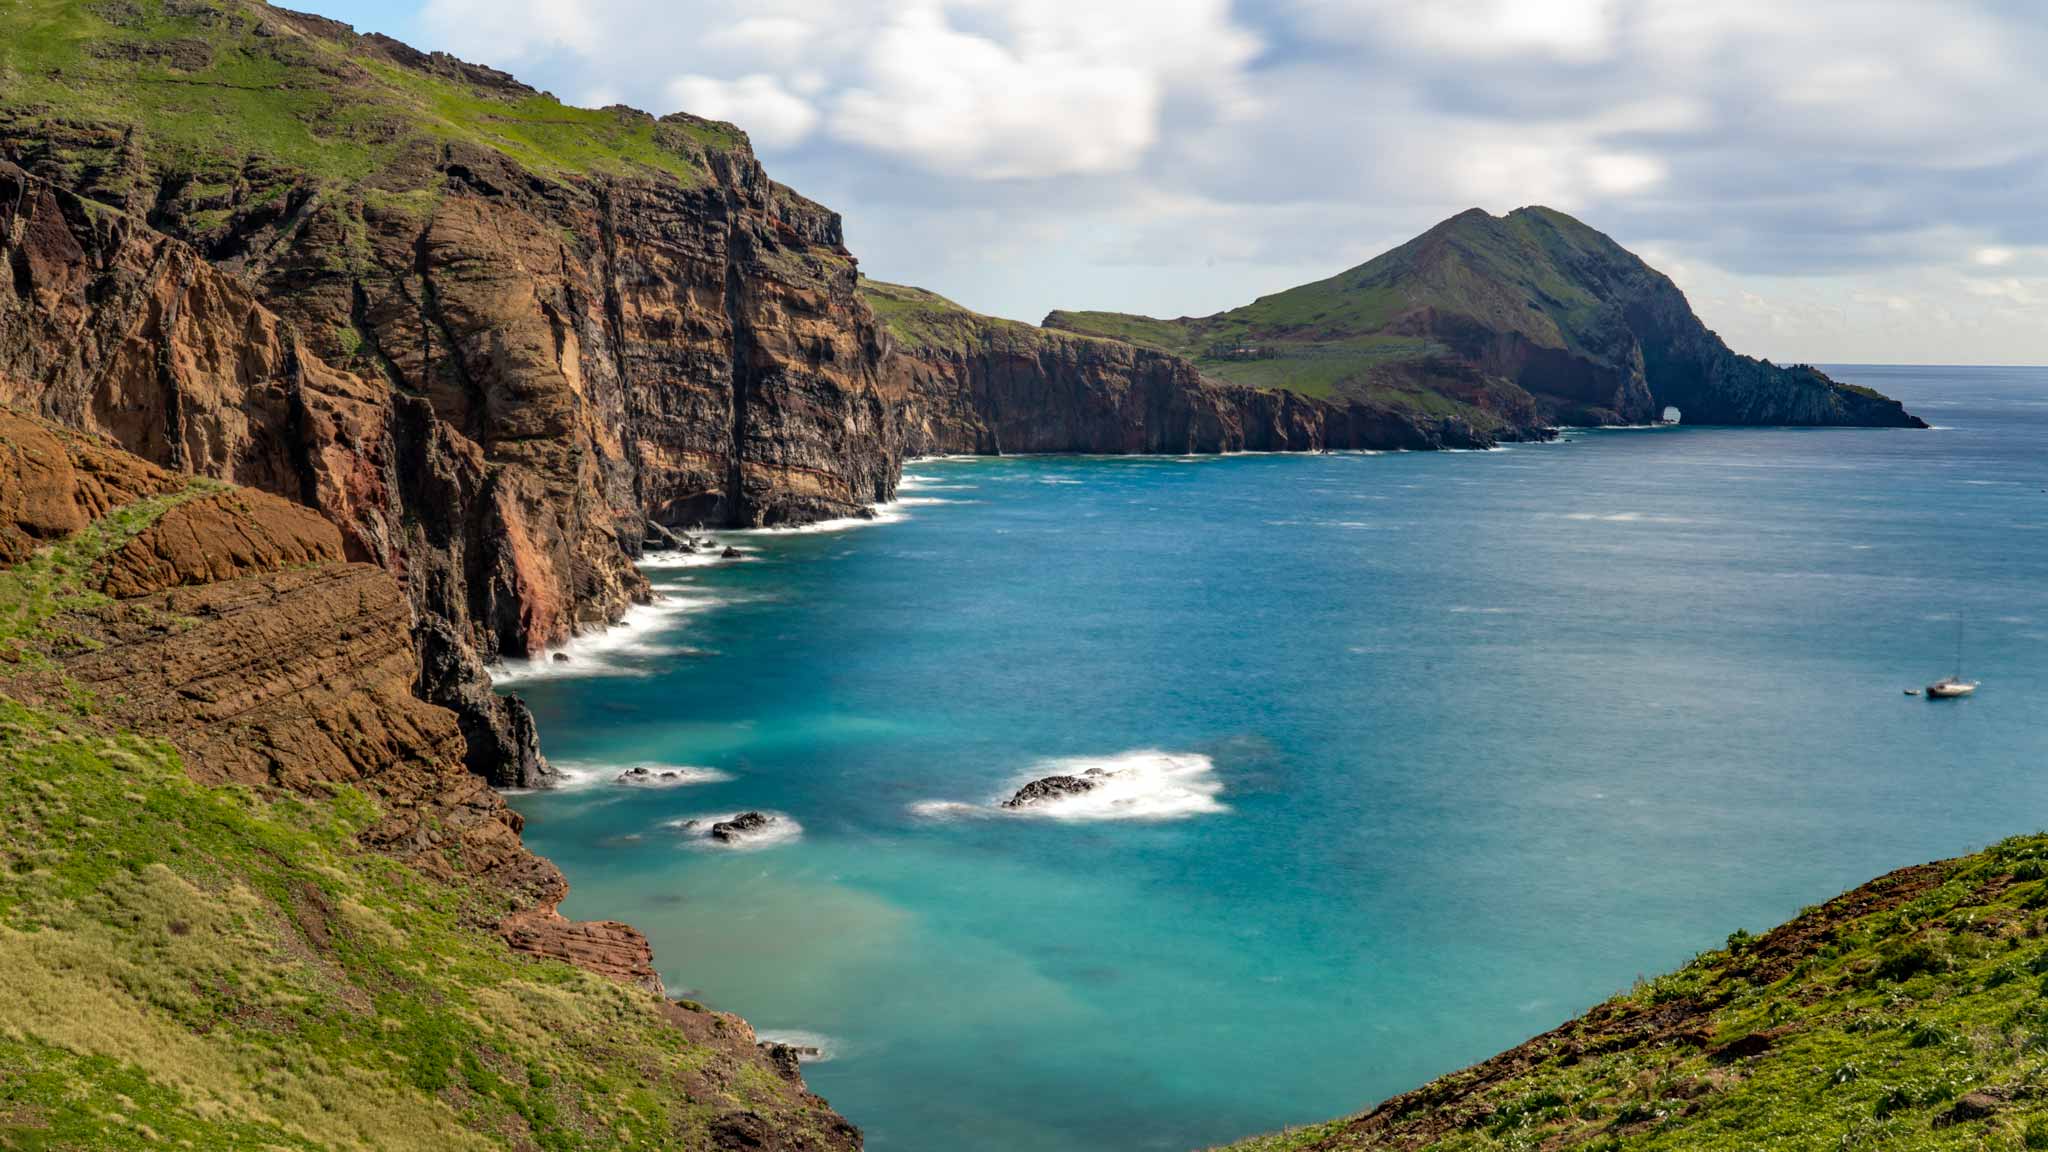 The trail out to Ponta de São Lourenço, with a beautiful blue ocean and green hills rising from the sea